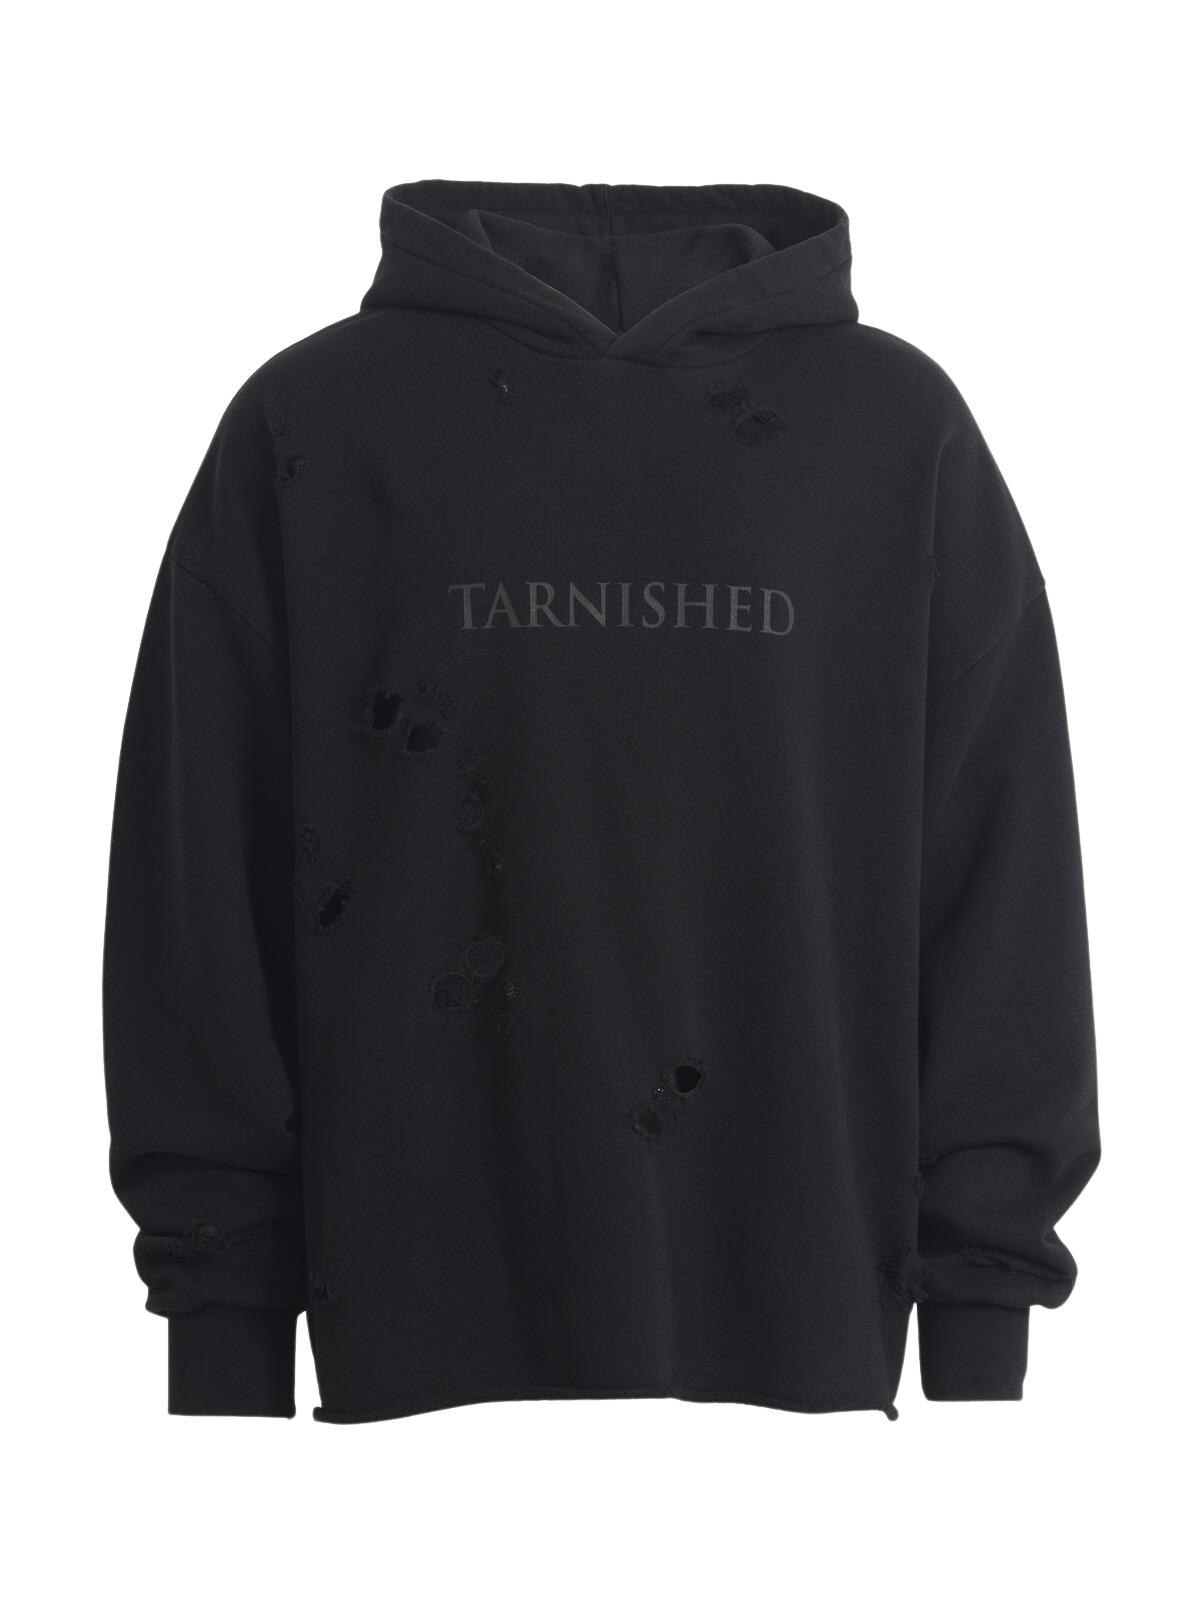 Tarnished Destroyed Hoodie - Front View